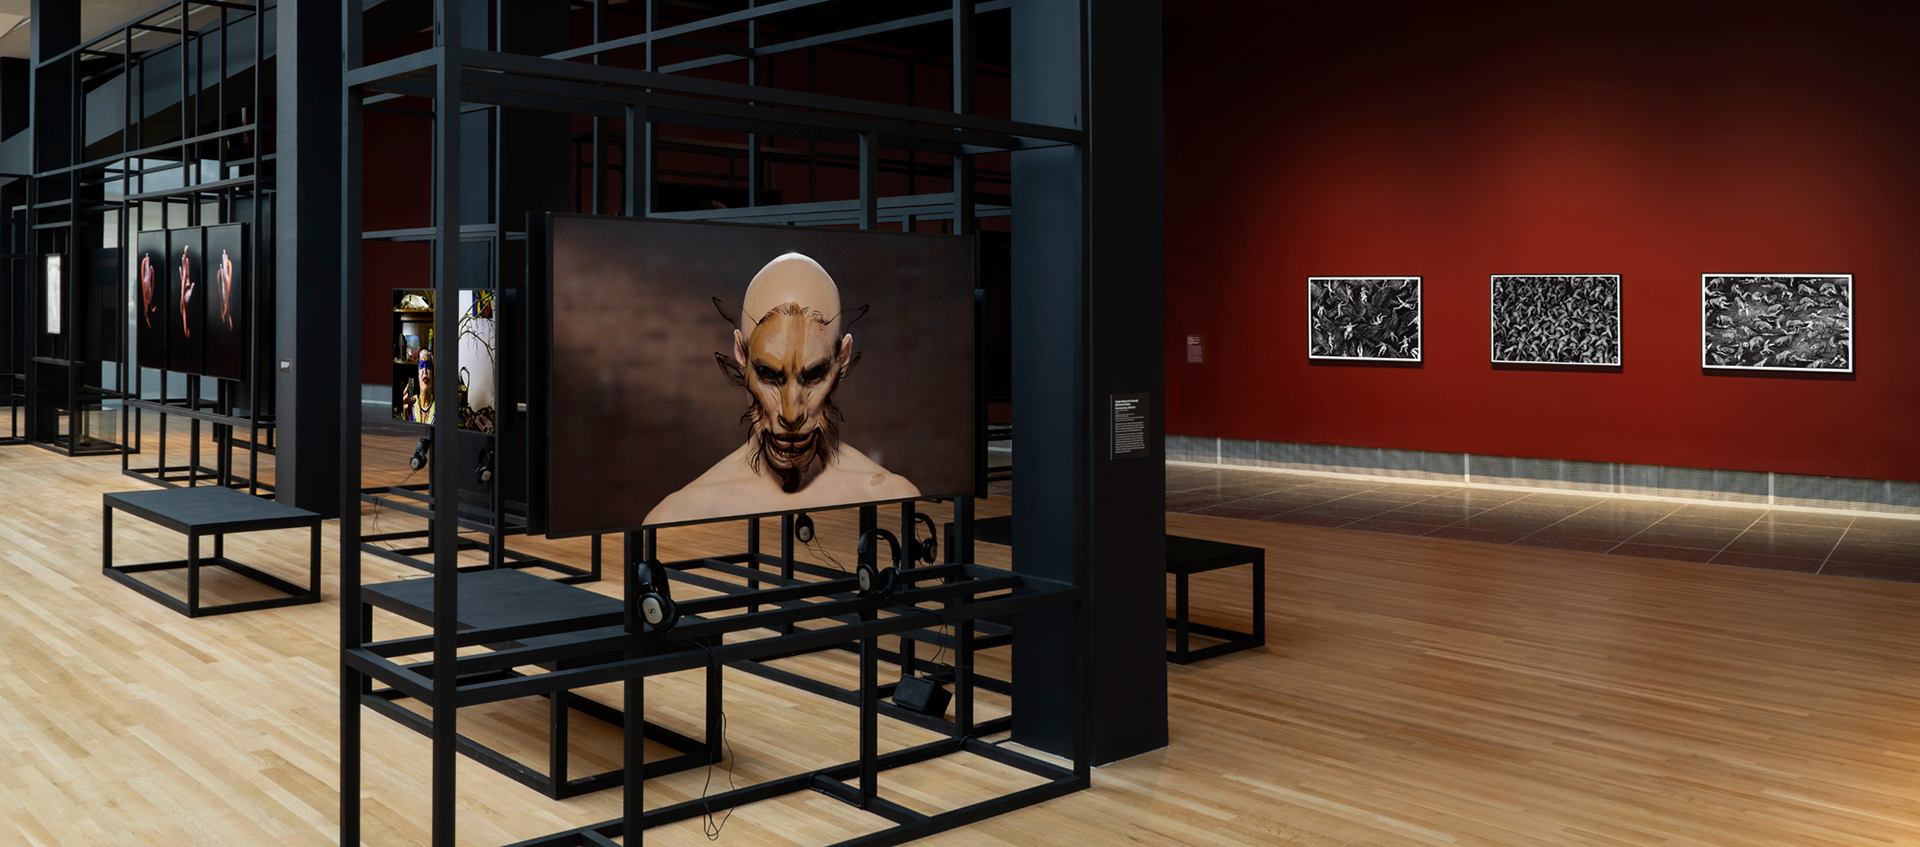 Gallery with burgundy walls and black scaffolding structure that displays monitors and photographs.